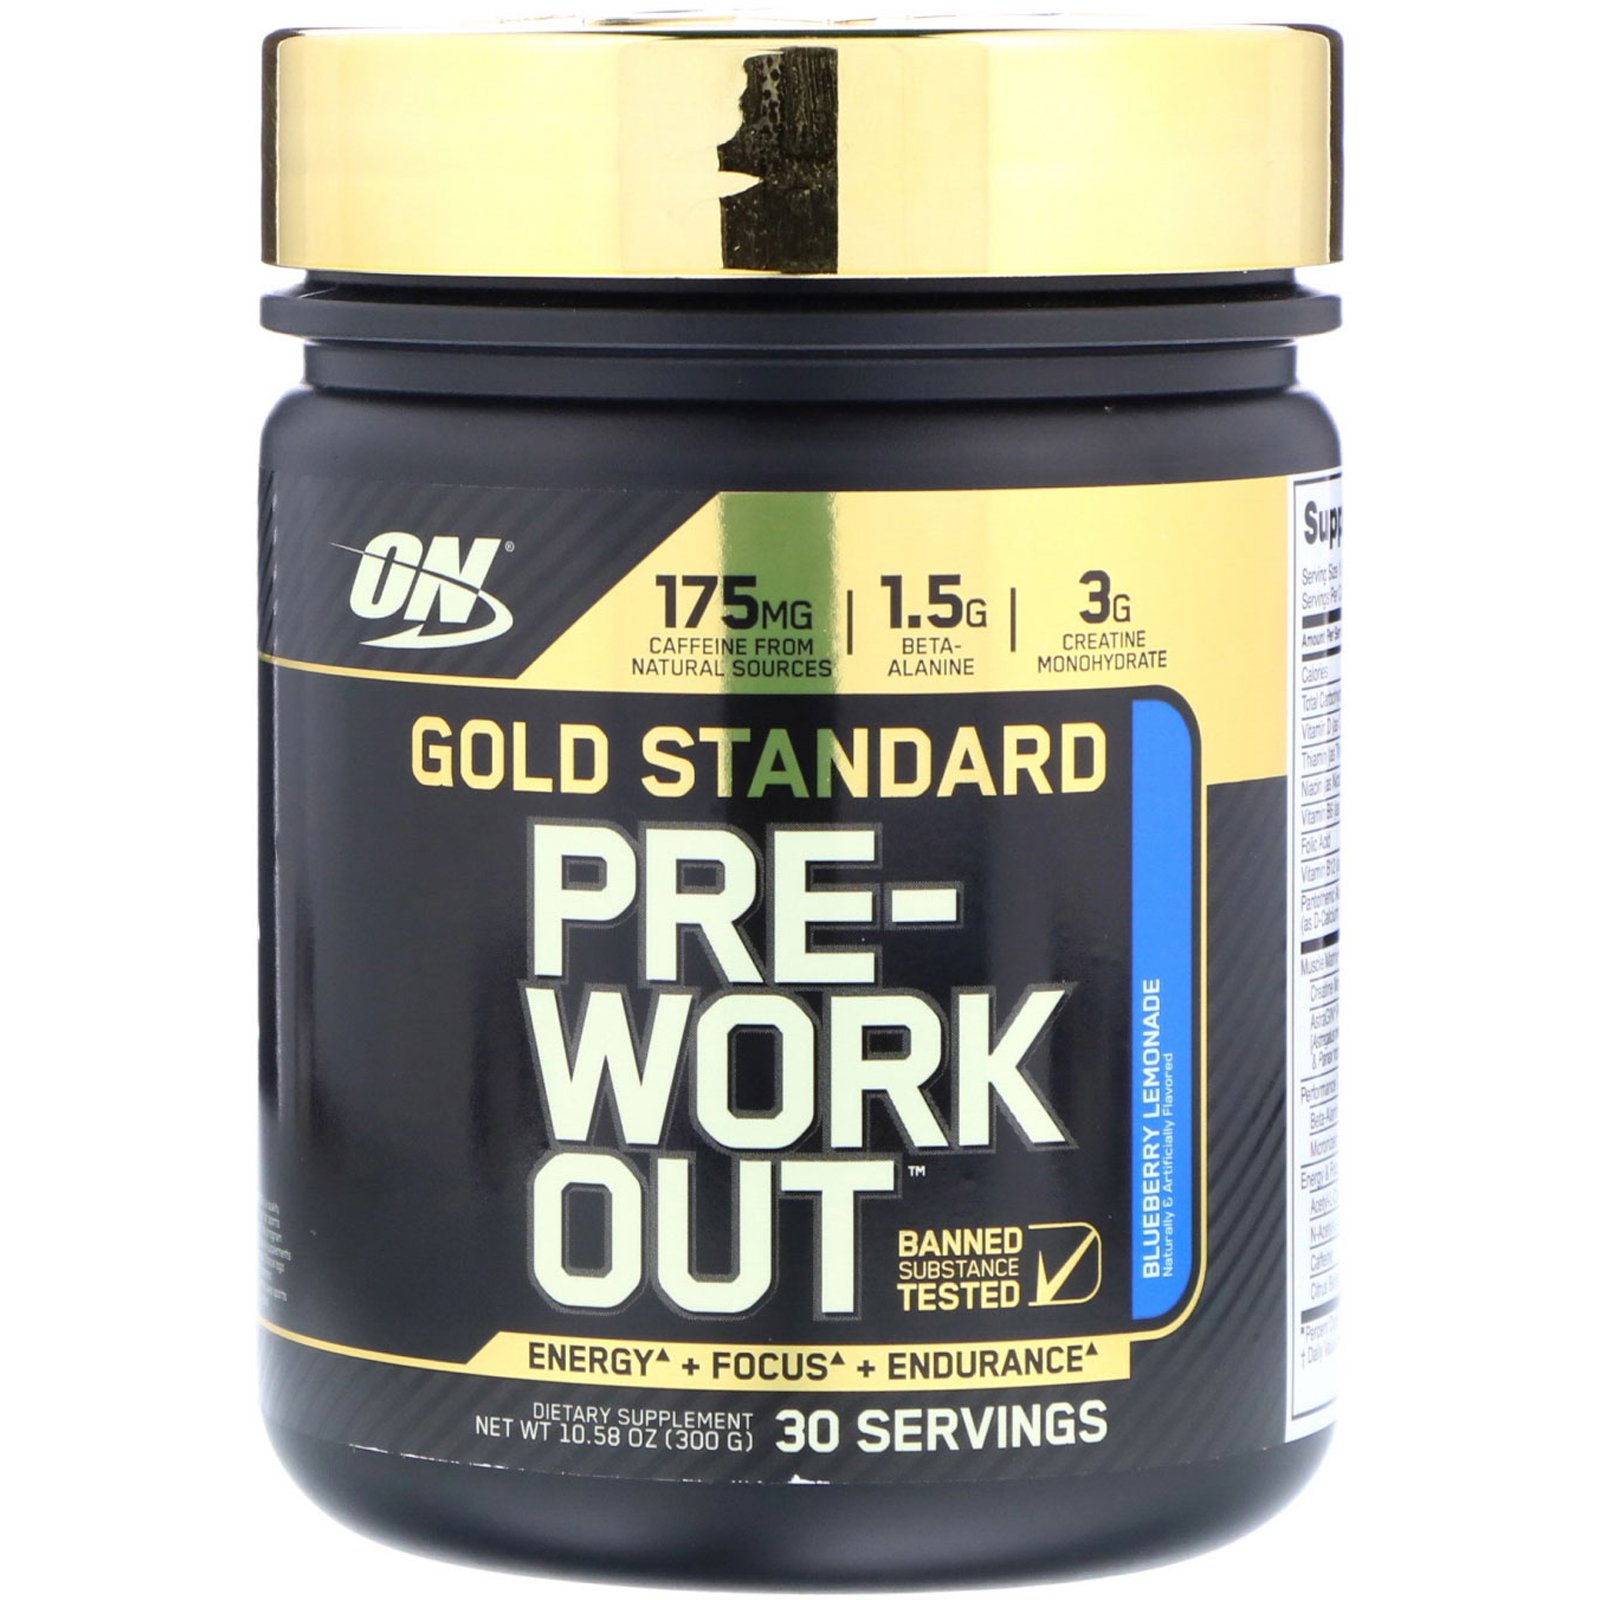 30 Minute Is gold standard pre workout vegan for Today